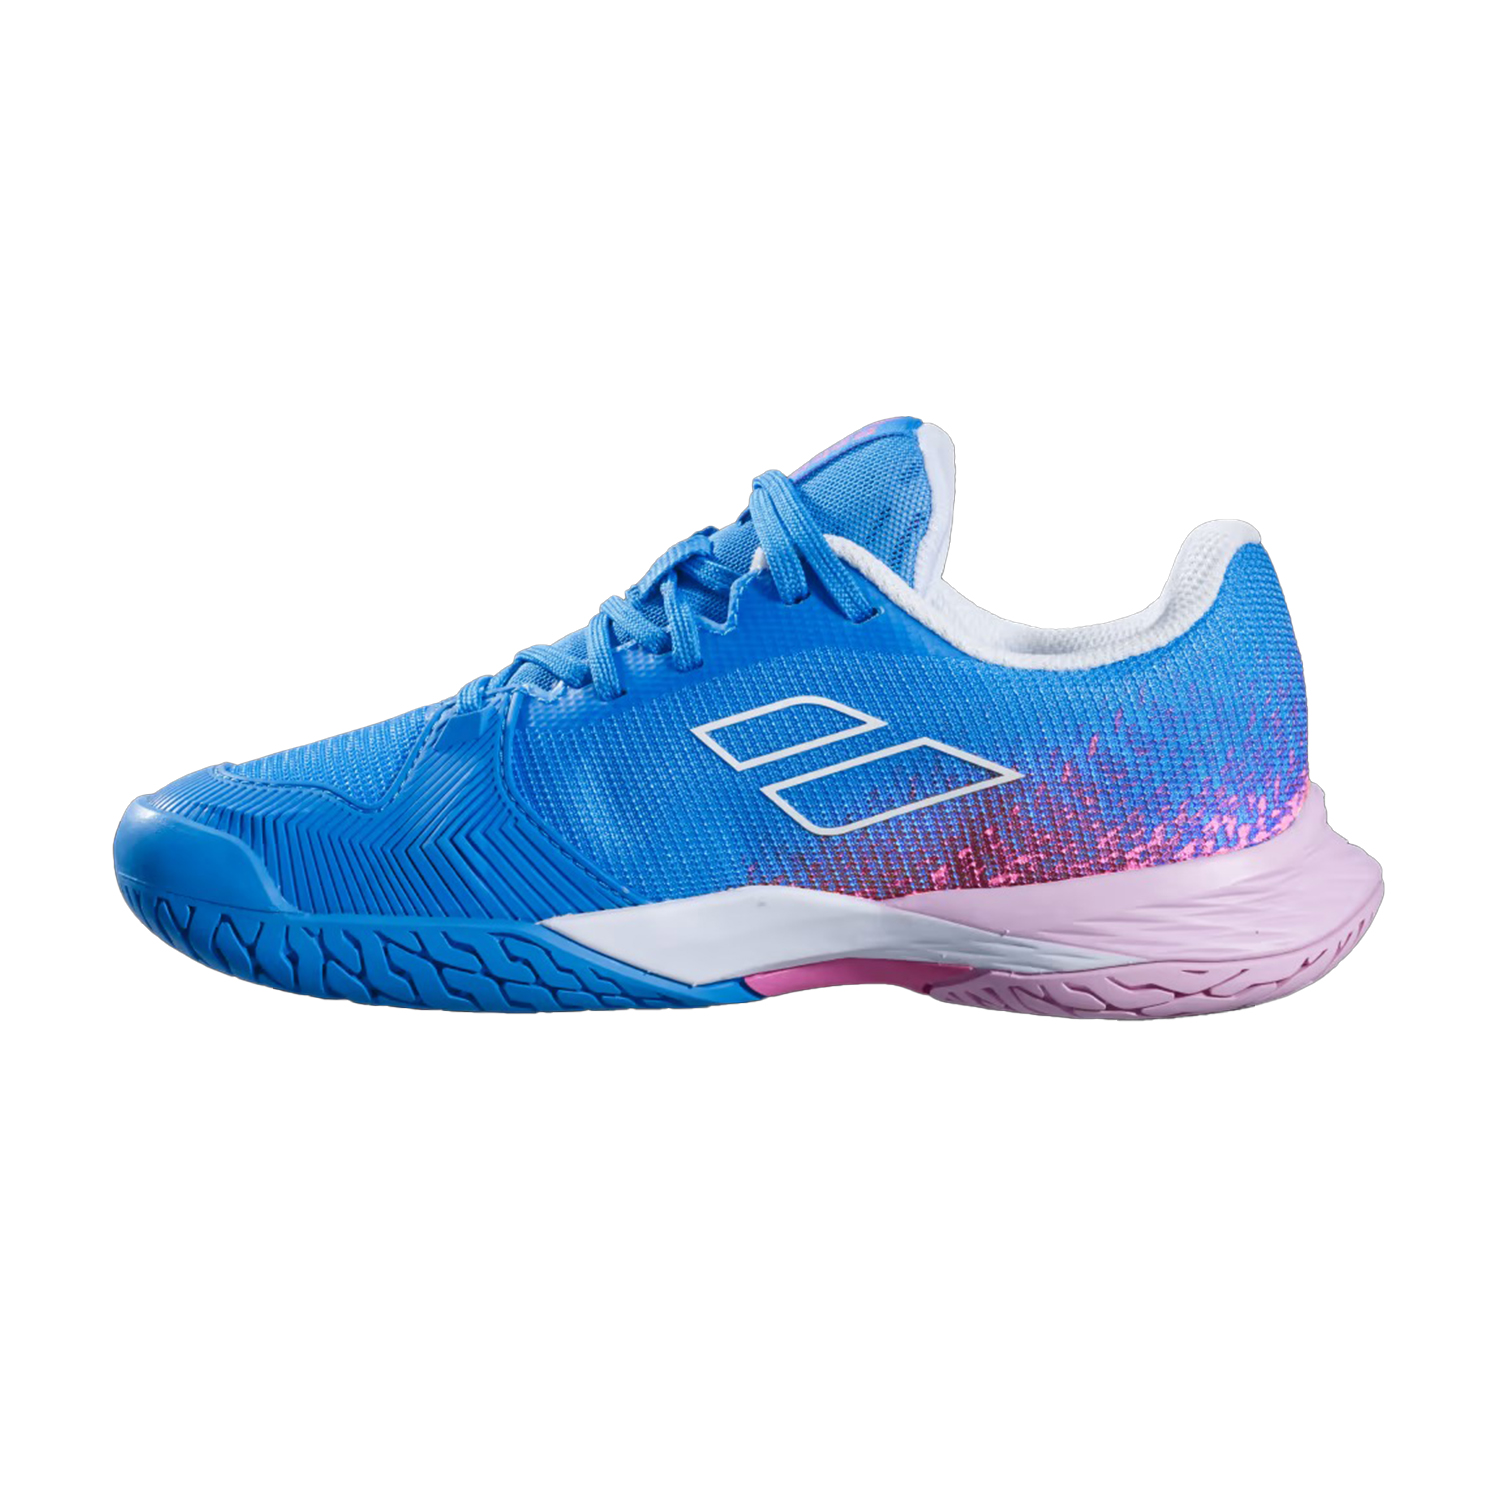 Babolat Jet Mach 3 All Court Girl - French Blue